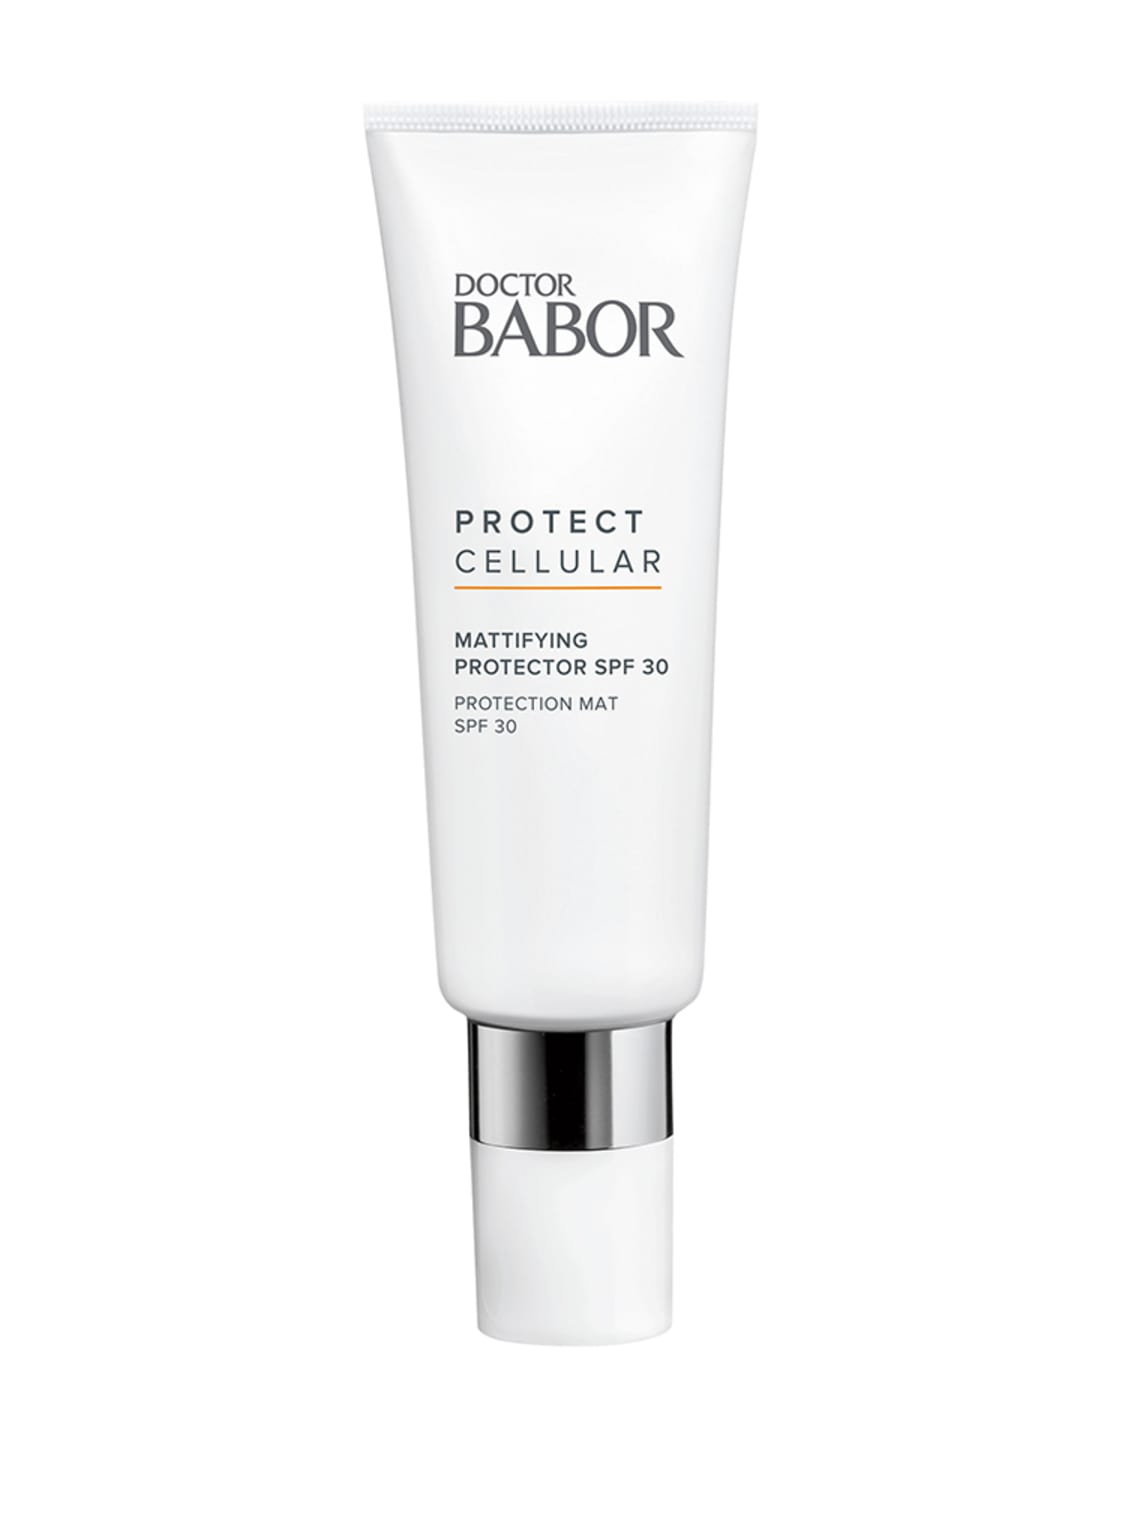 Image of Babor Doctor Babor Protect Cellular - Mattifying Protector SPF 30 50 ml